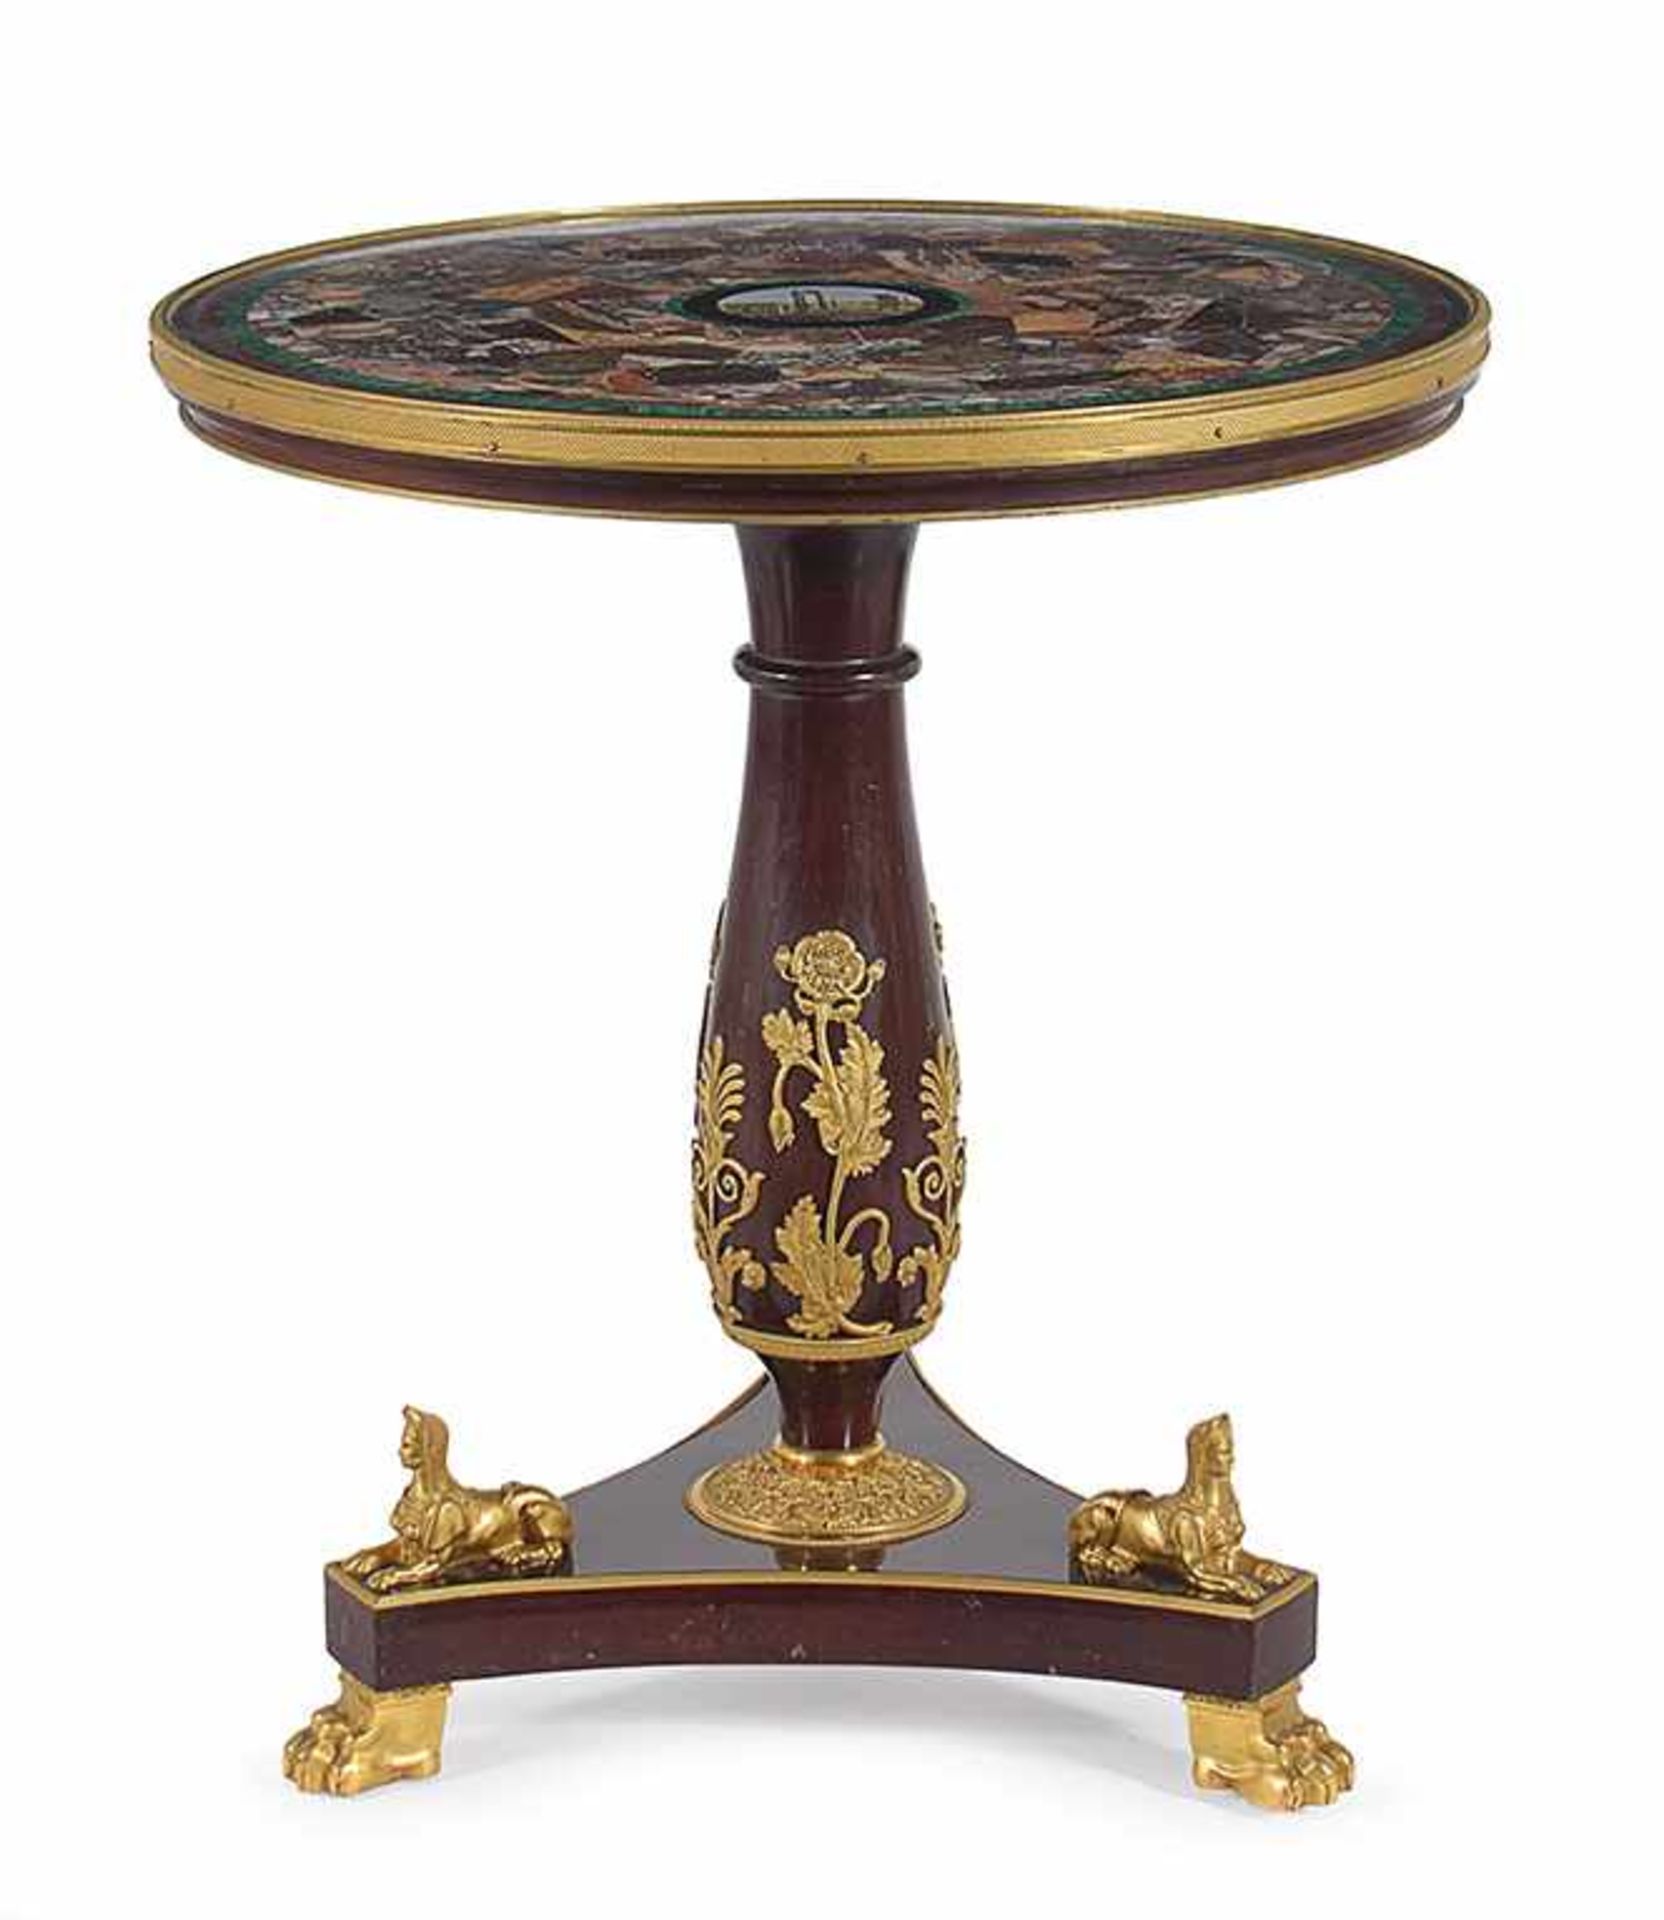 An elegant Roman mahogany and gilt bronze table with a circular polychrome marbles top centered by a